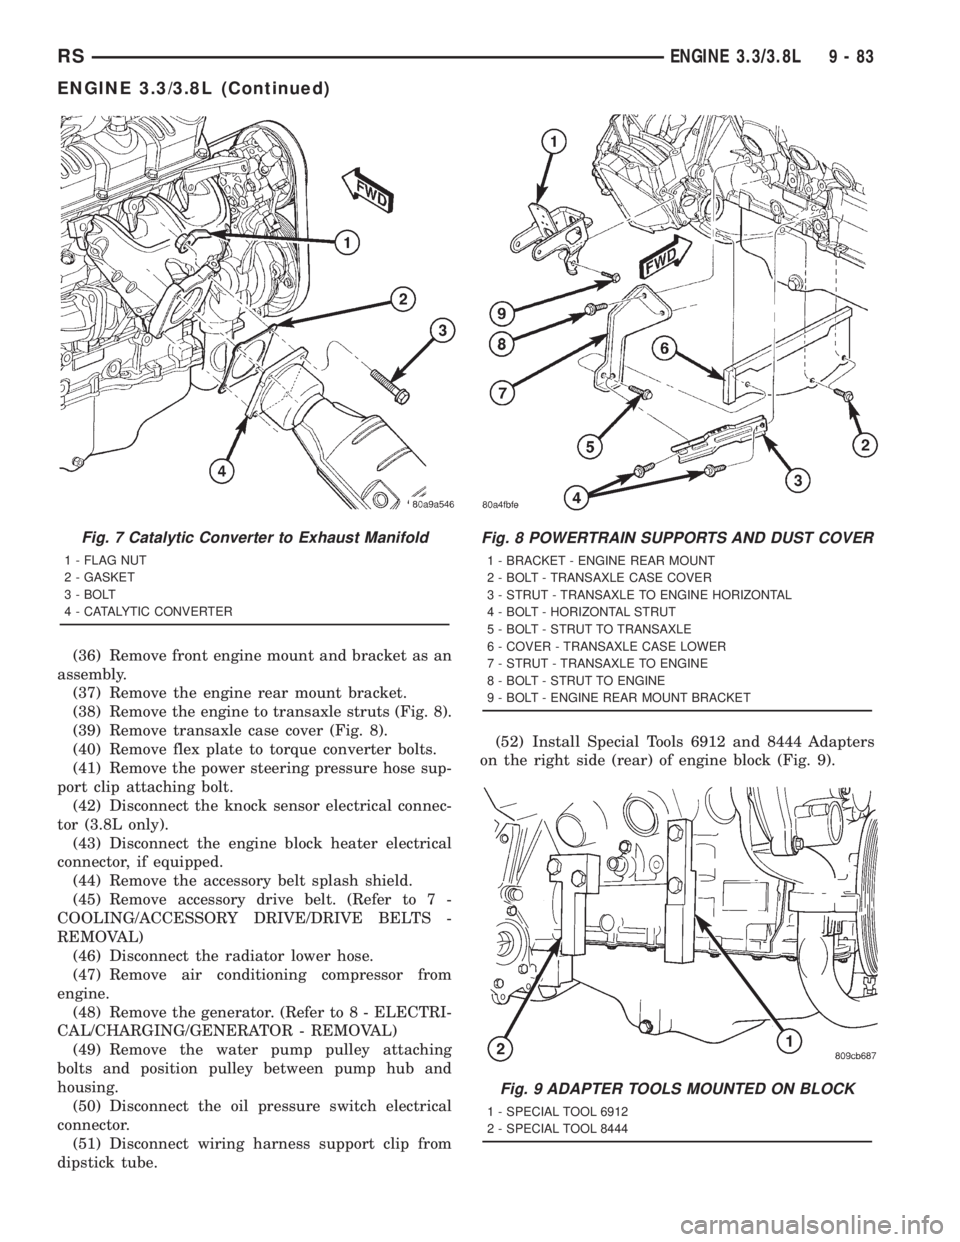 CHRYSLER VOYAGER 2001  Service Manual (36) Remove front engine mount and bracket as an
assembly.
(37) Remove the engine rear mount bracket.
(38) Remove the engine to transaxle struts (Fig. 8).
(39) Remove transaxle case cover (Fig. 8).
(4